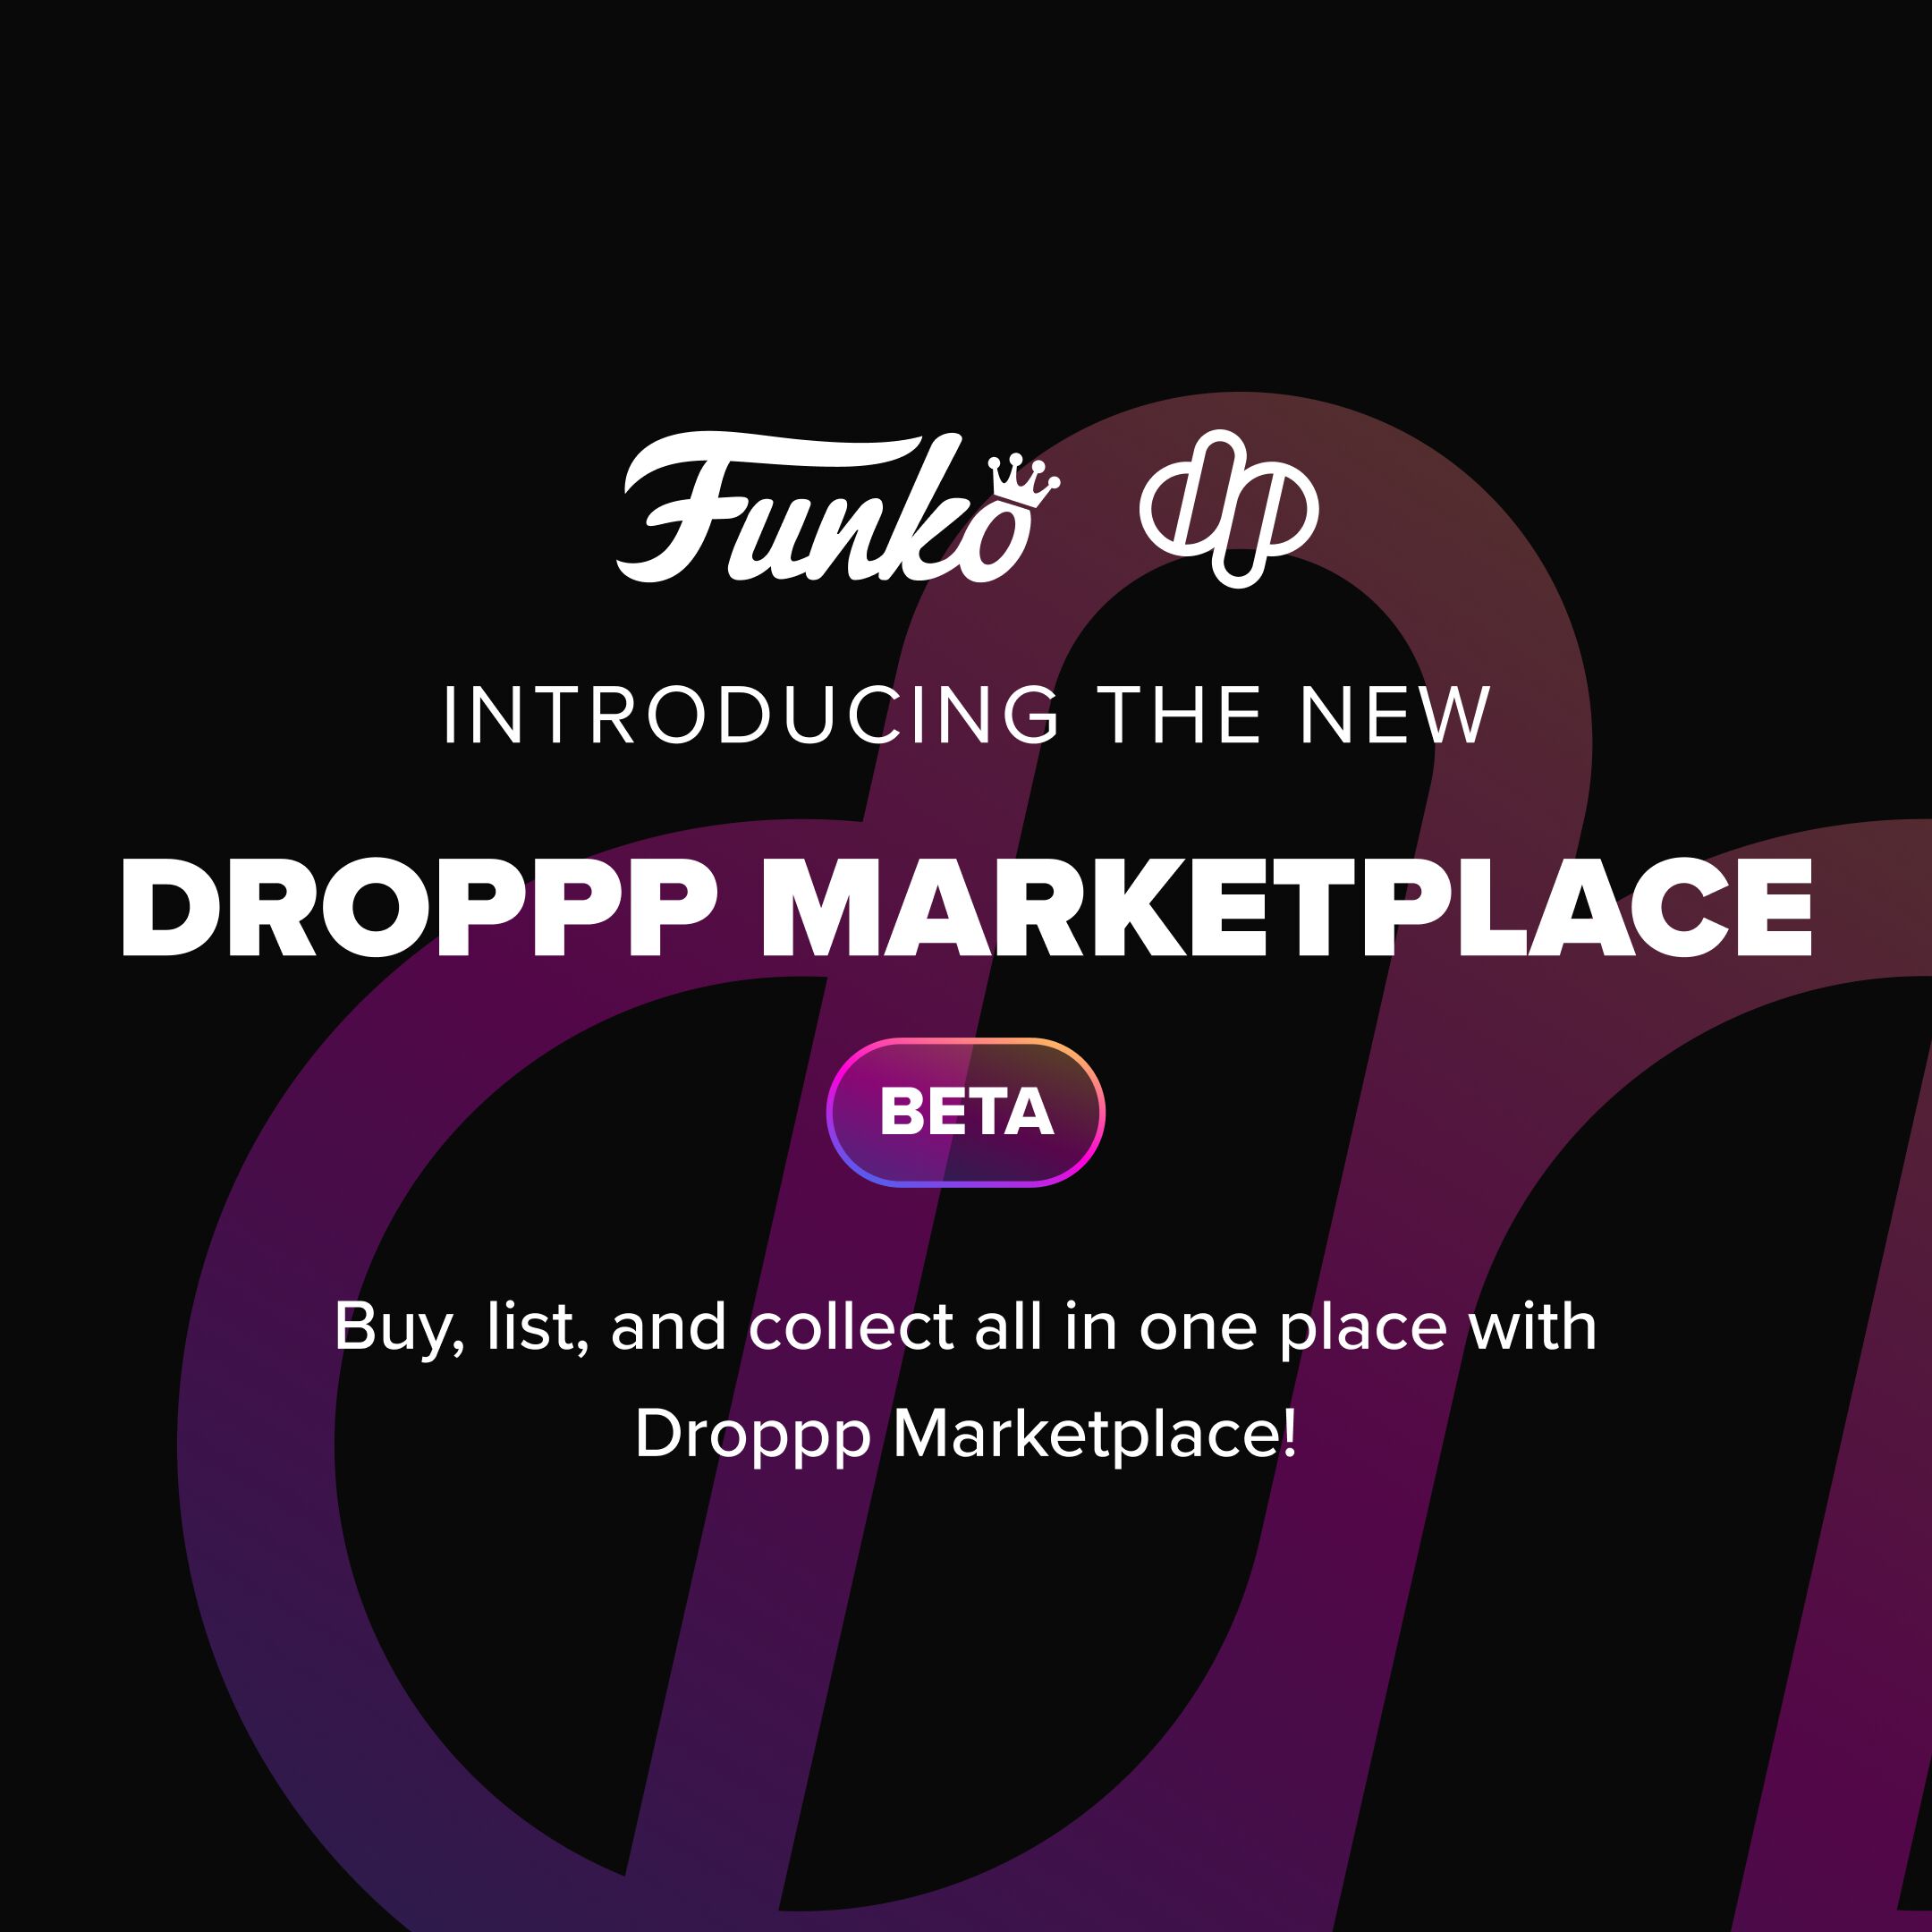 Droppp, Home to Funko Digital Pop!™, Introduces Secondary Marketplace!